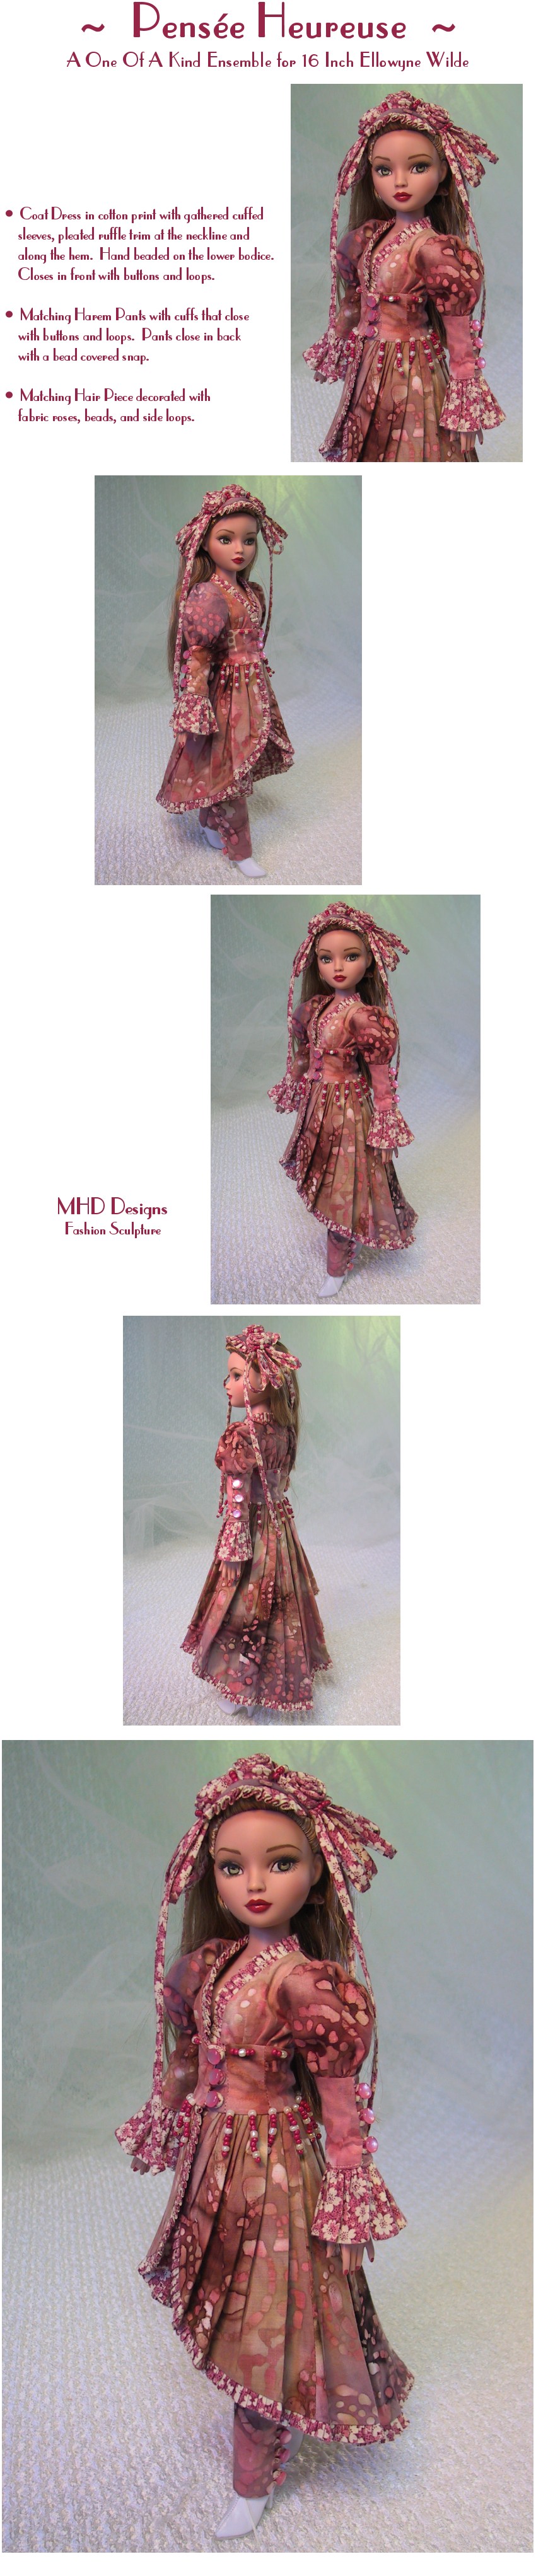 Happy Thought  - a One Of A Kind Ensemble by MHD Designs